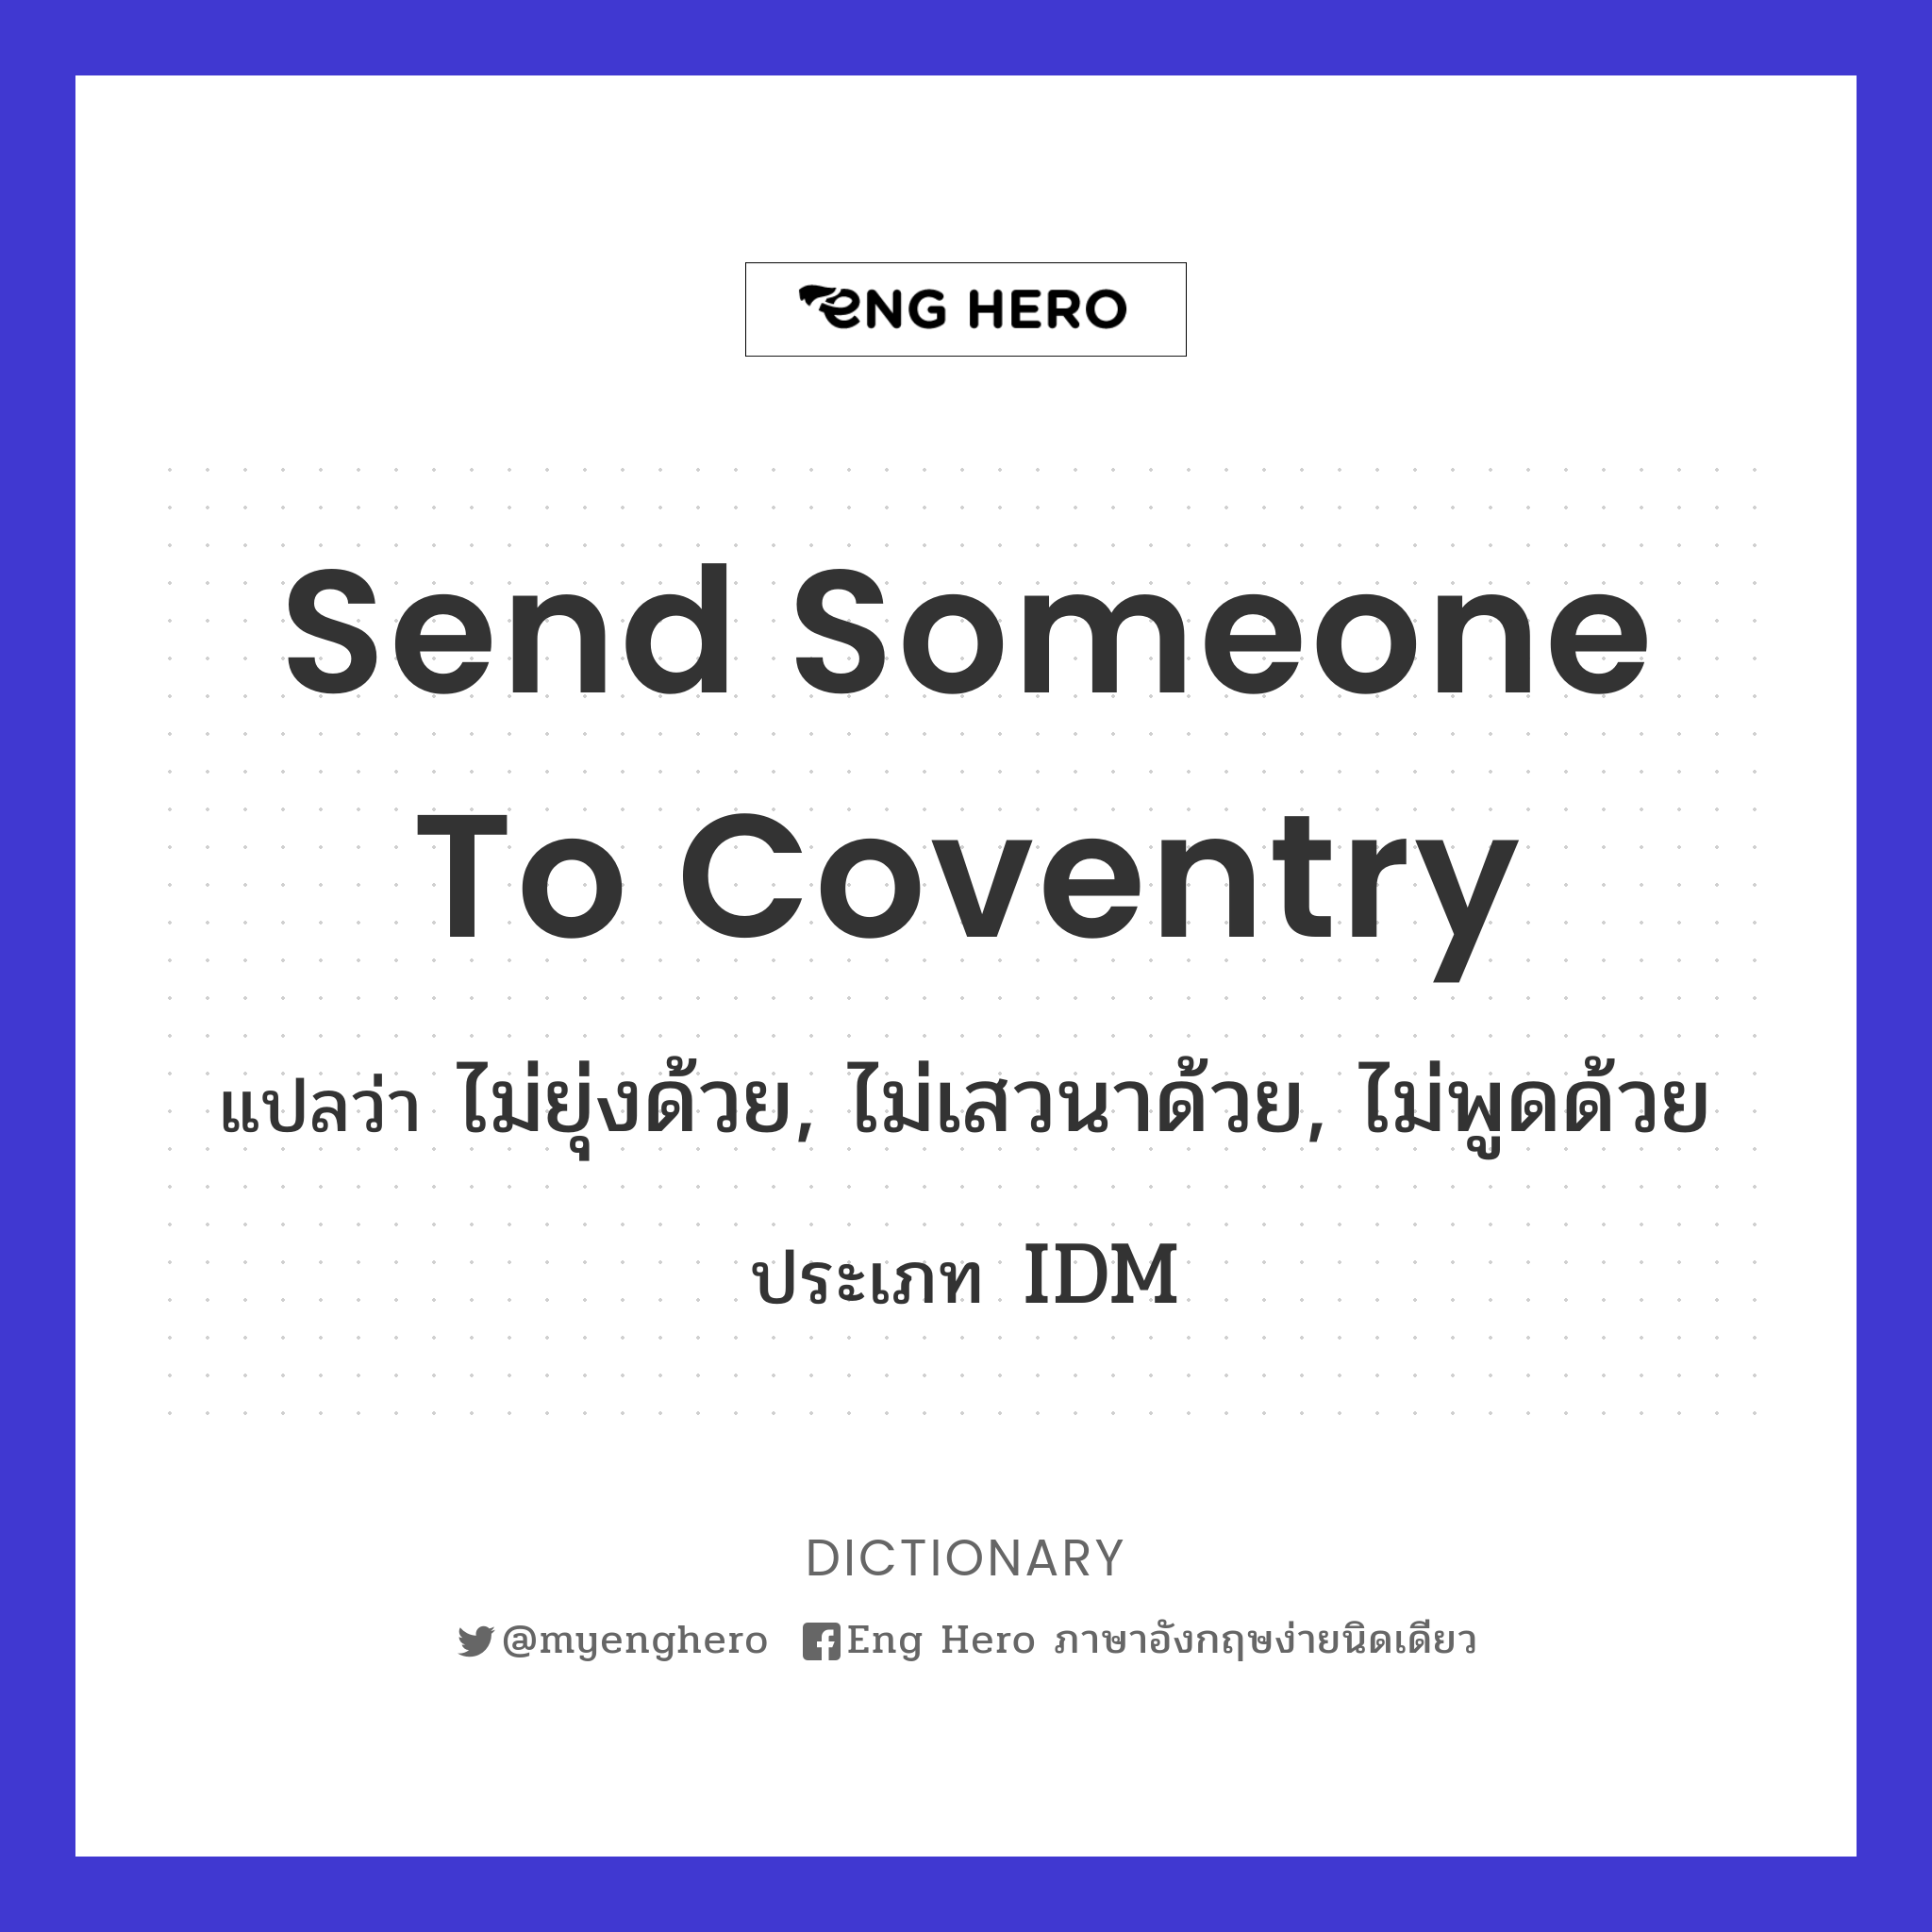 send someone to Coventry